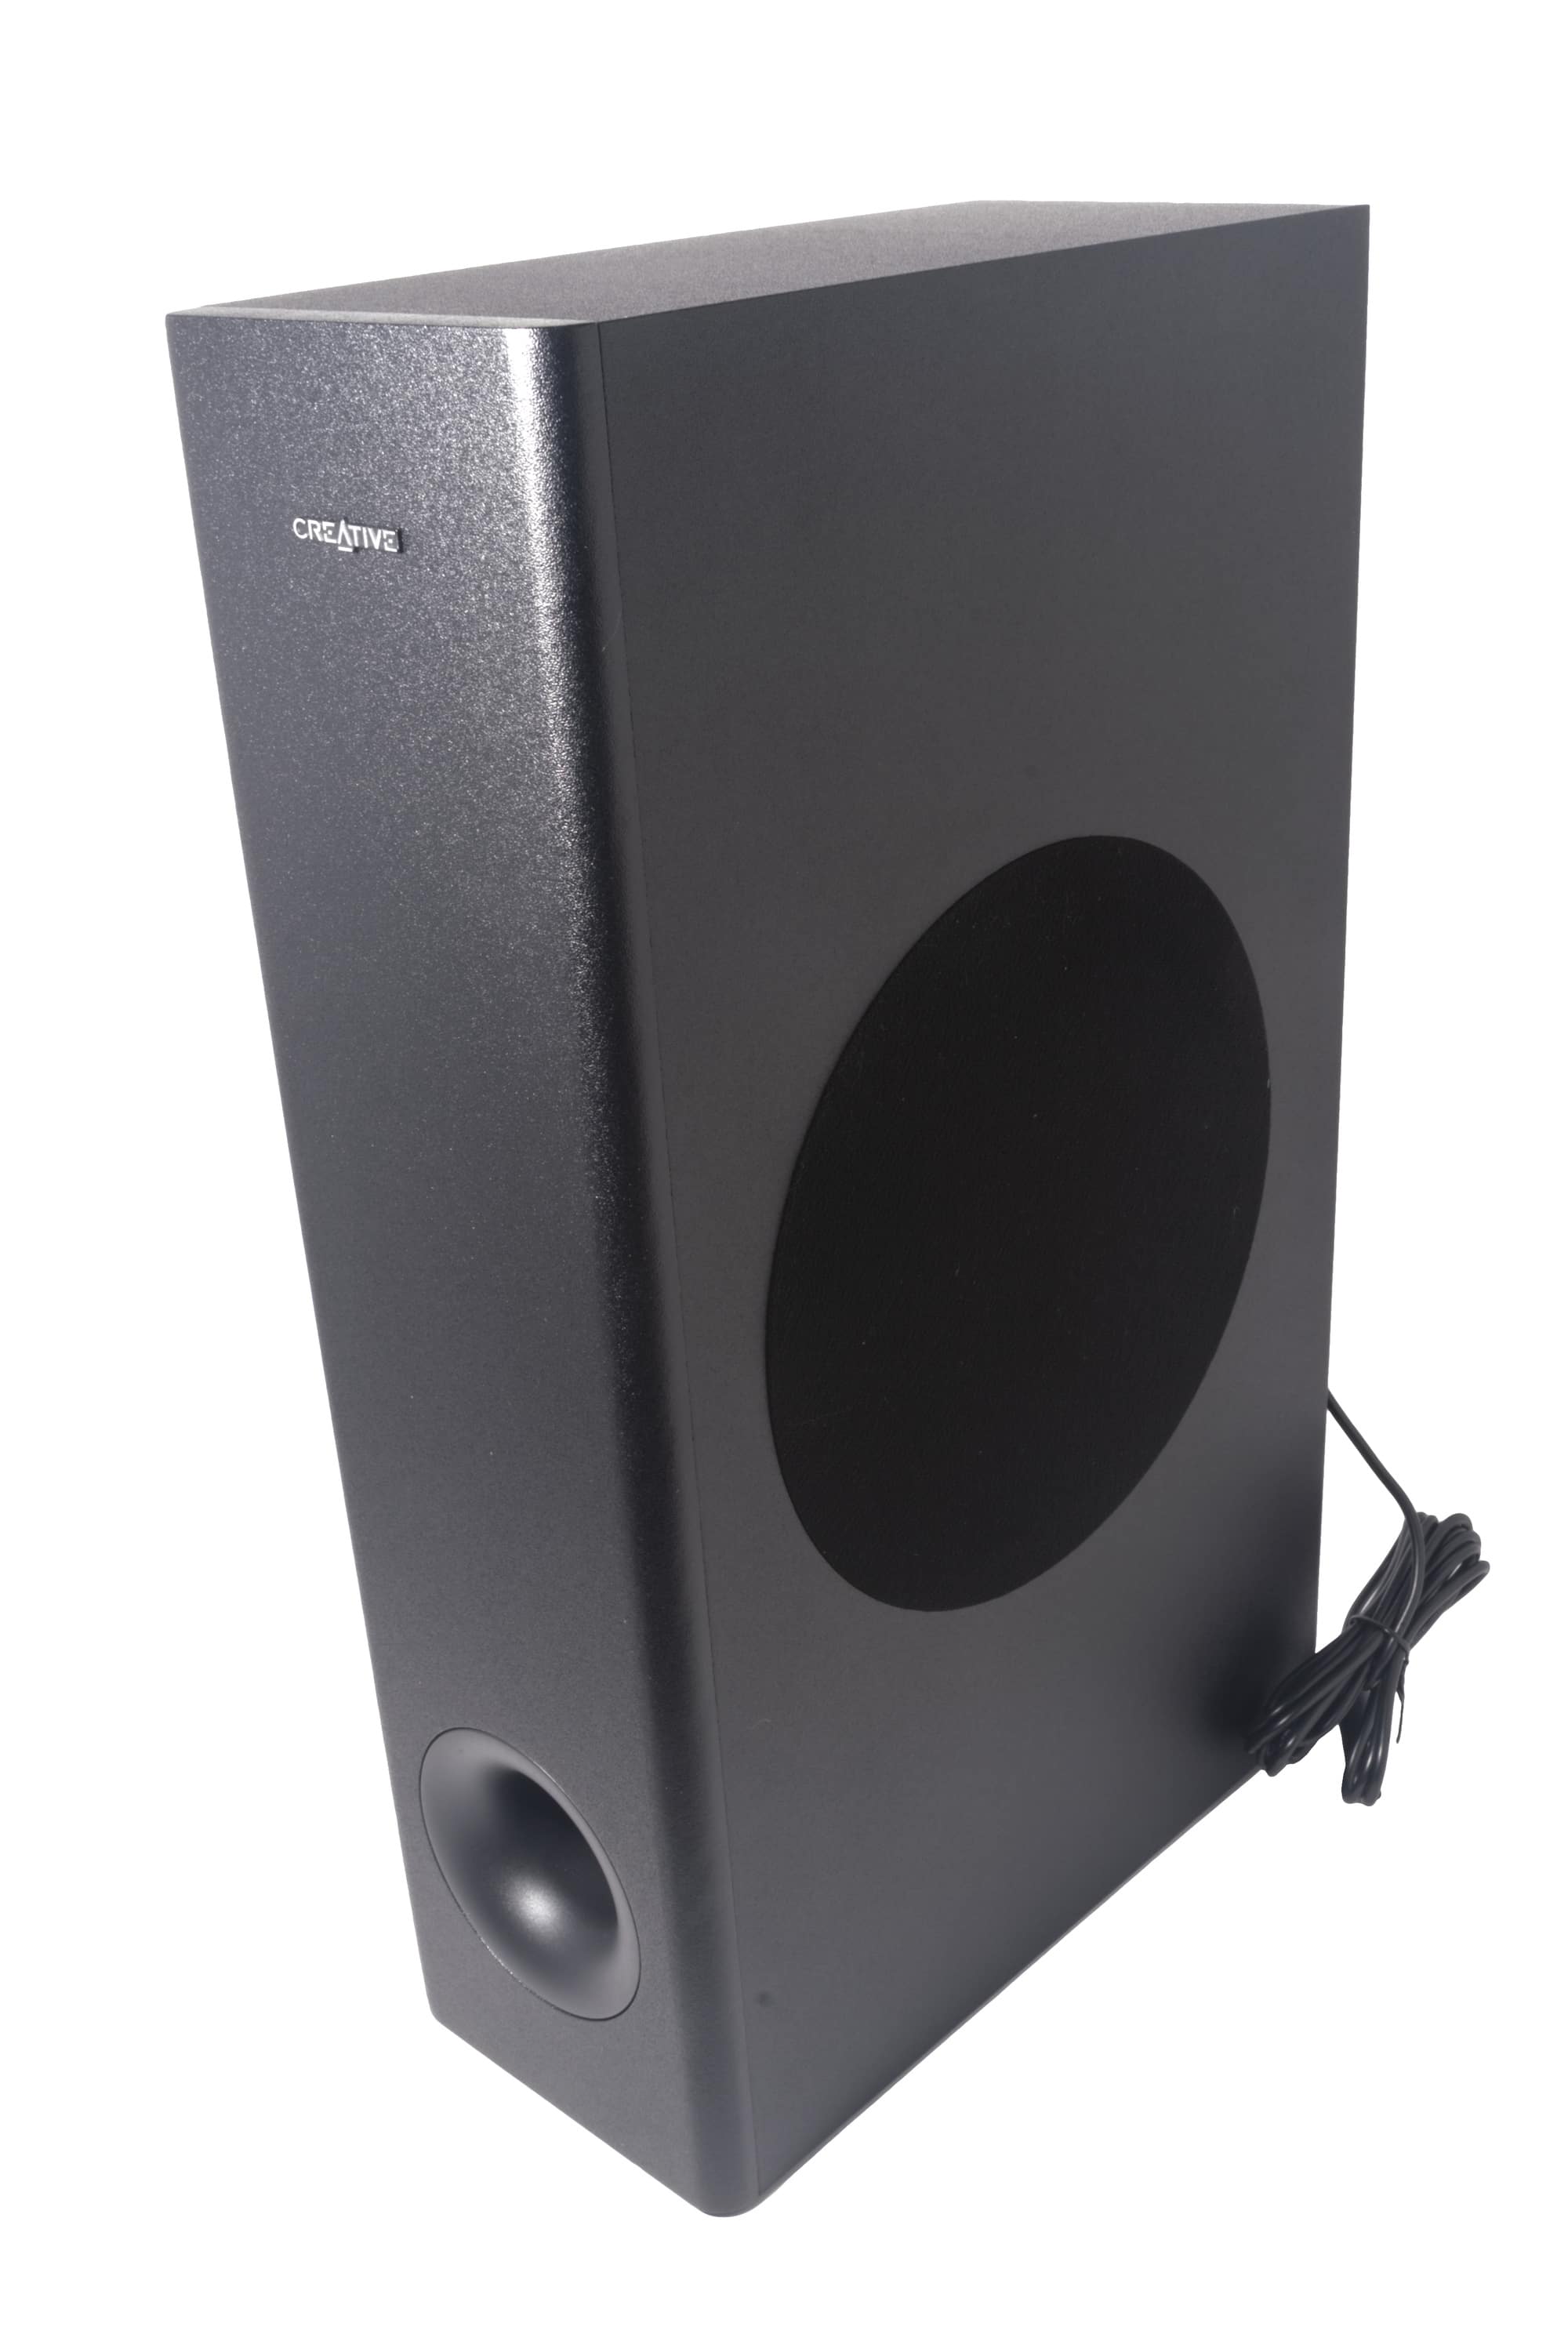 - V2 in Stage subwoofer Creative and soundbar from test 2.1